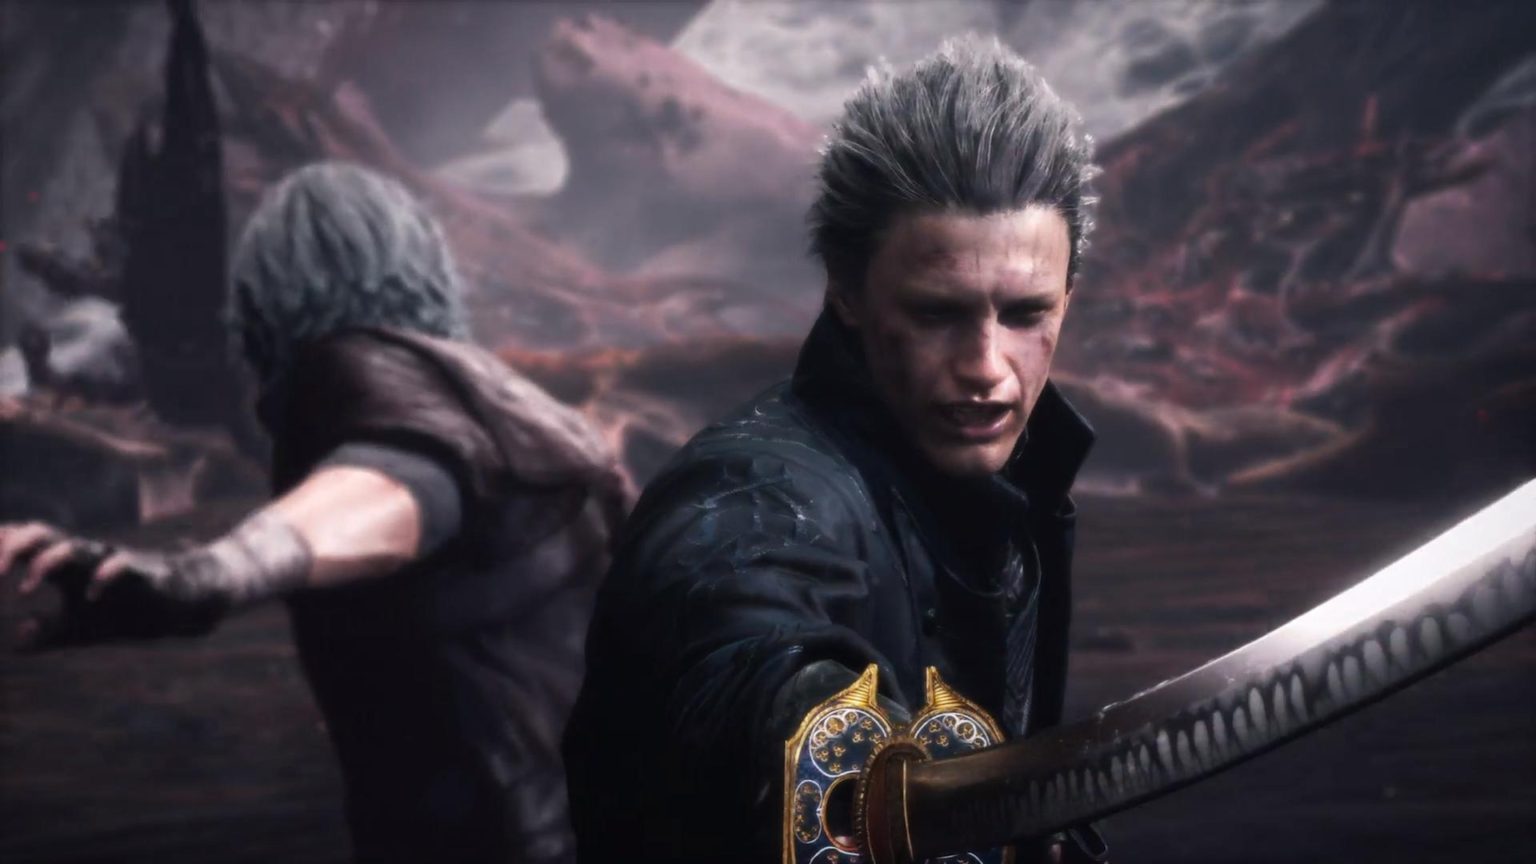 devil may cry 5 special edition differences